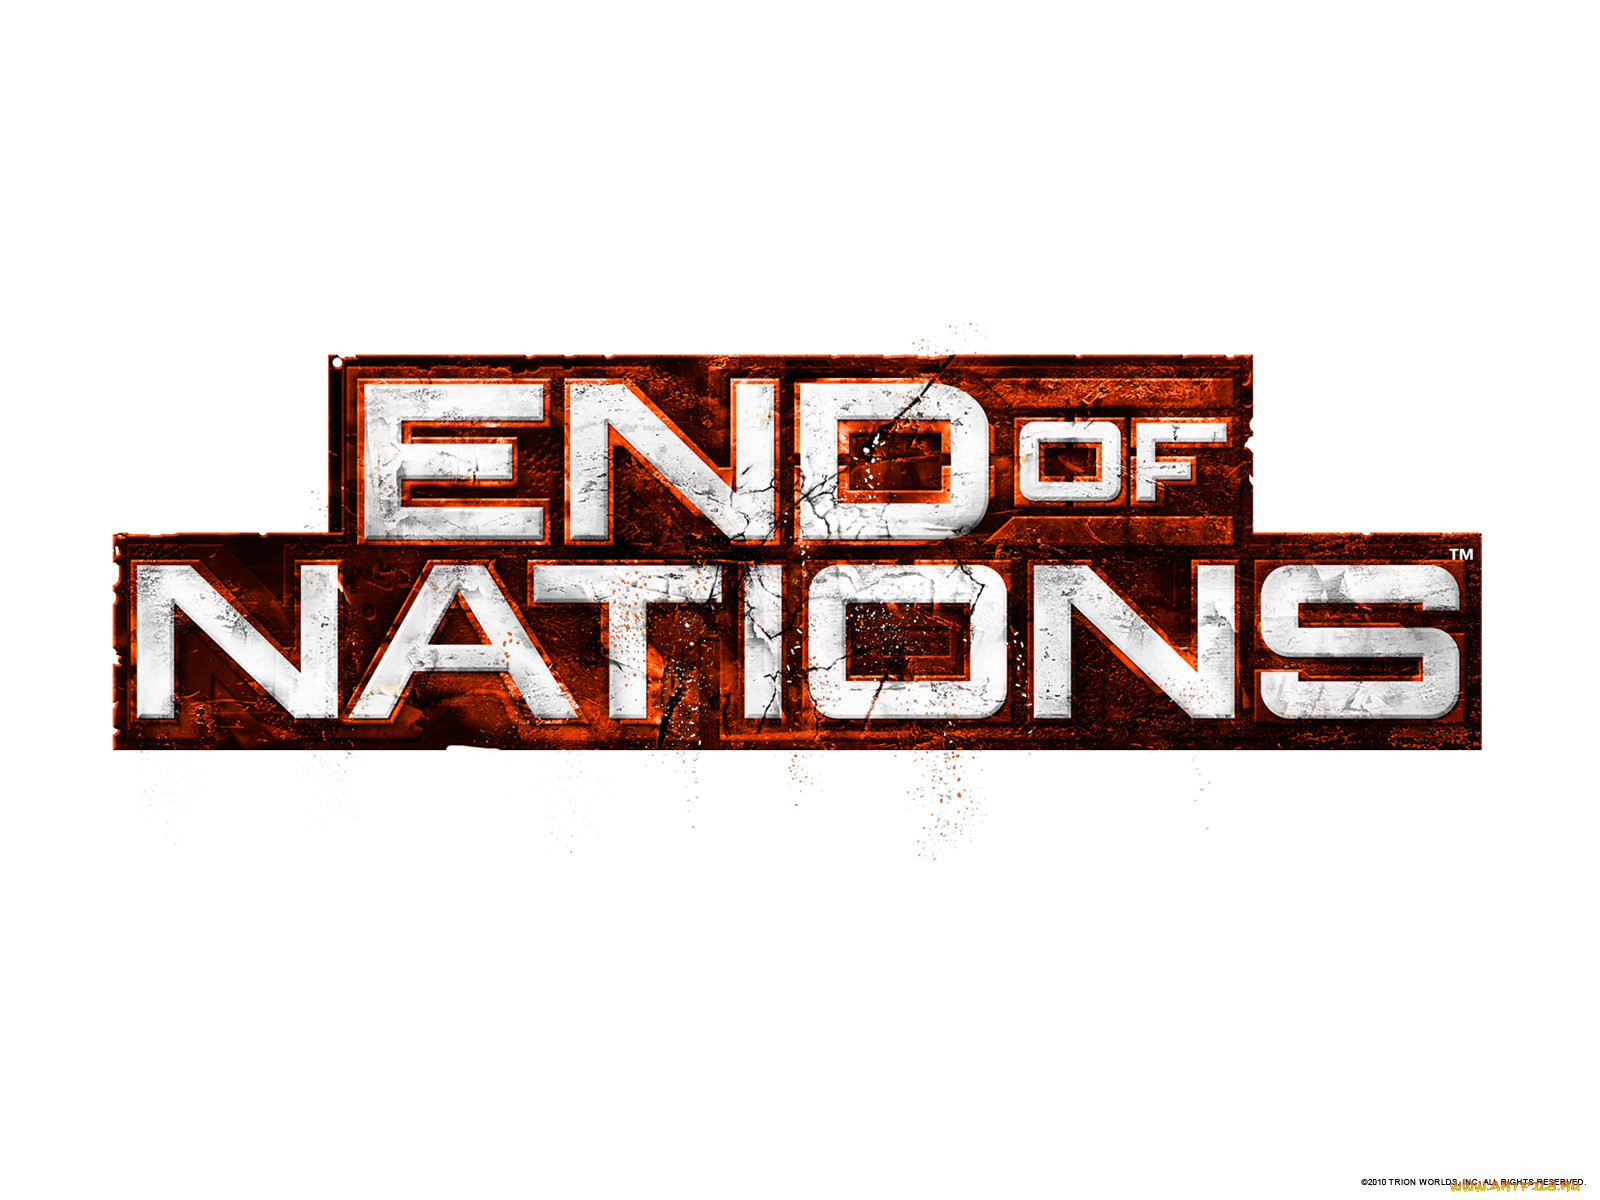 end, of, nations, , 